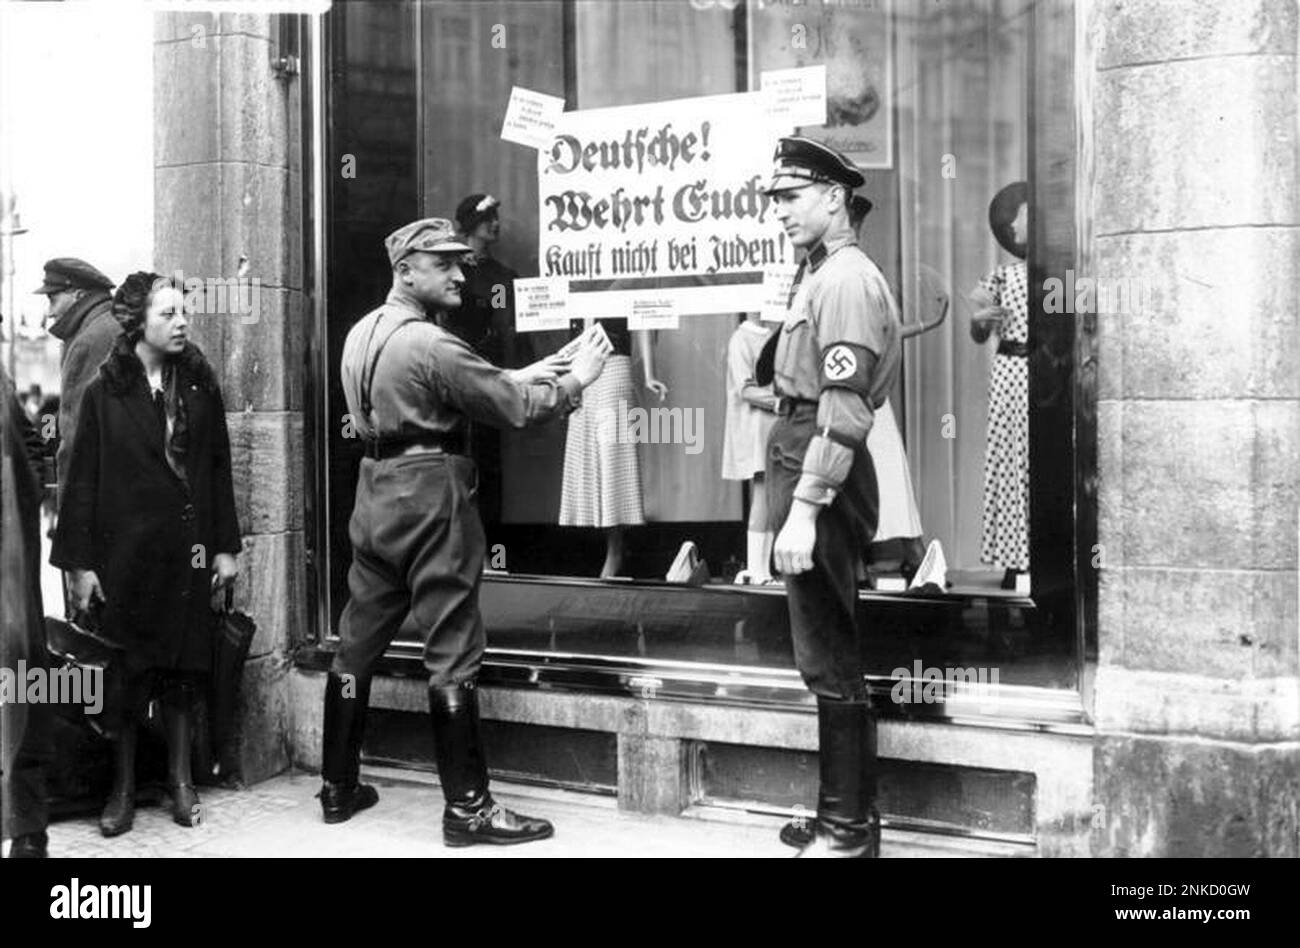 SA paramilitaries outside a Berlin store posting signs with: 'Deutsche! Wehrt Euch! Kauft nicht bei Juden!' ('Germans! Defend yourselves! Don't buy from Jews!'). Photo Bundesarchiv, Bild 102-14468 / Georg Pahl / CC-BY-SA 3.0, CC BY-SA 3.0 de, https://commons.wikimedia.org/w/index.php?curid=5415525 Stock Photo